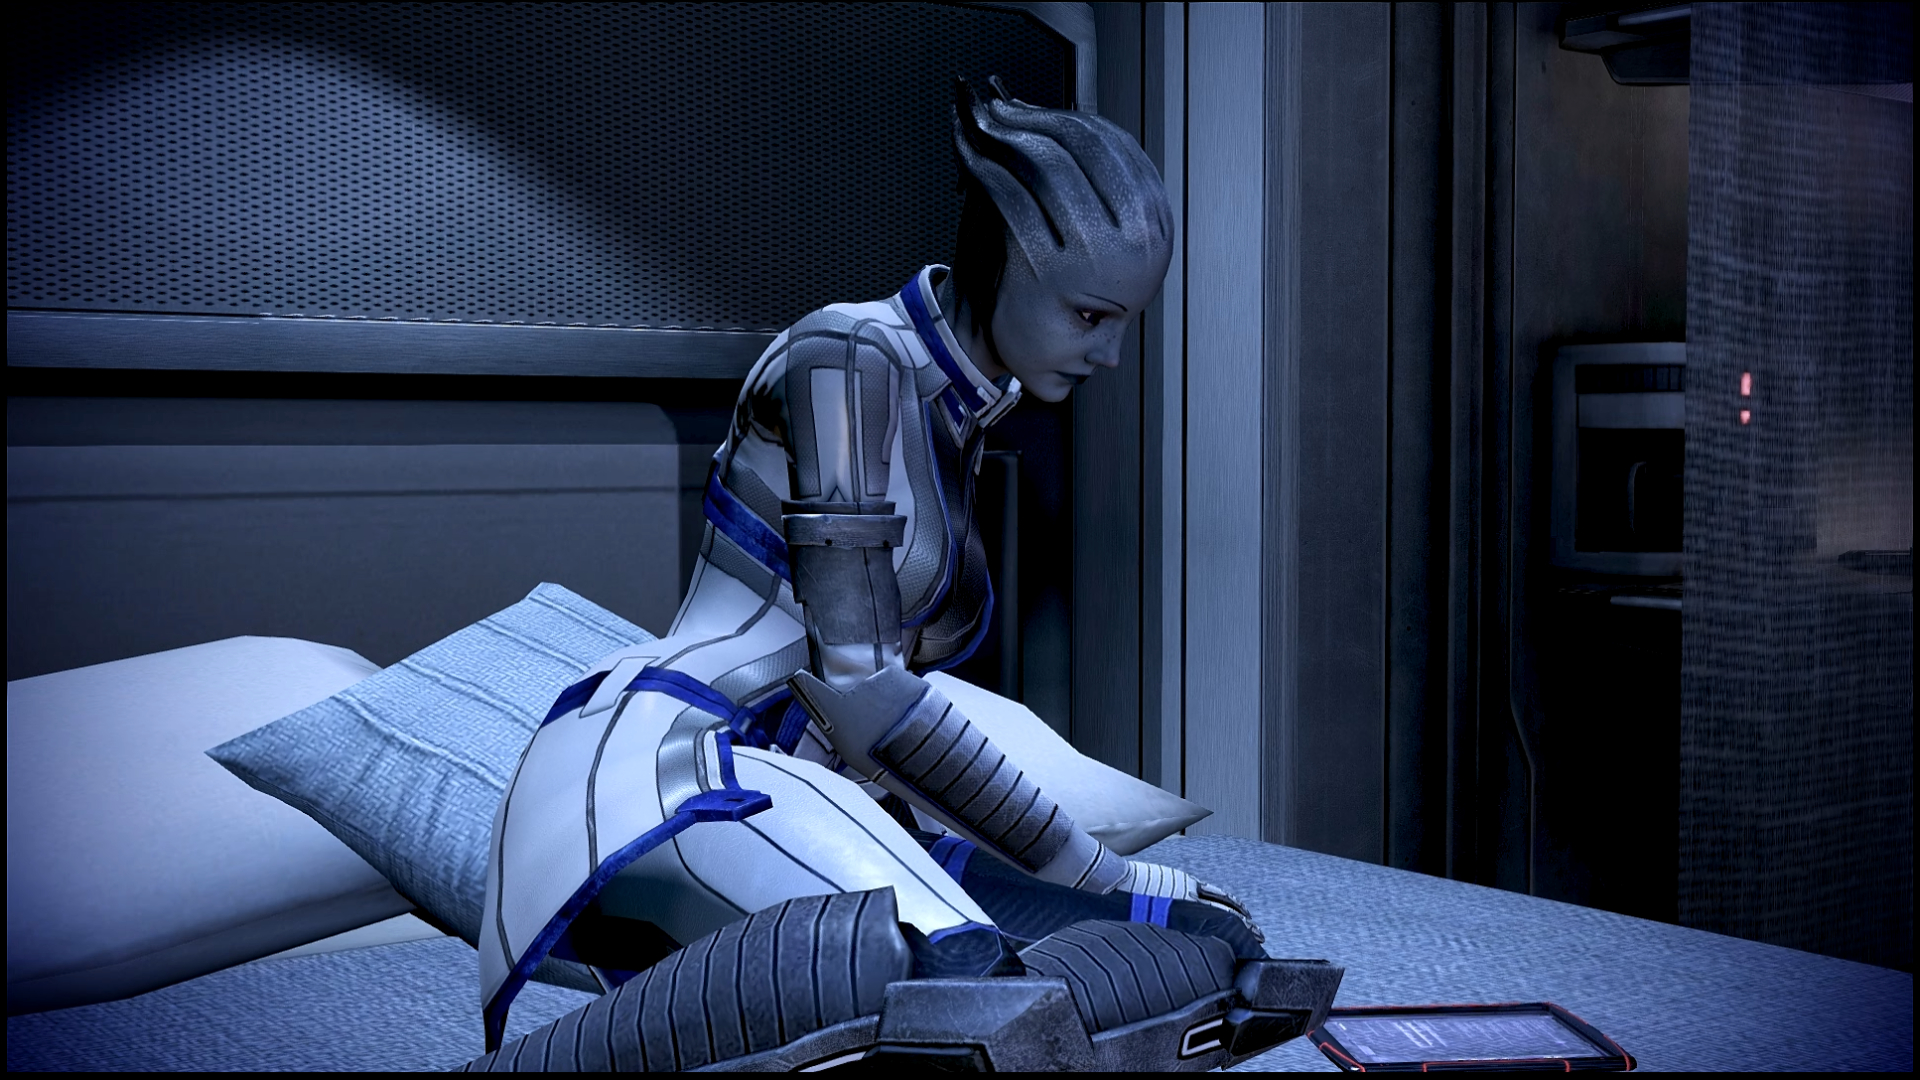 Mass Effect Liara Studying Dreamscene By Droot On Deviantart